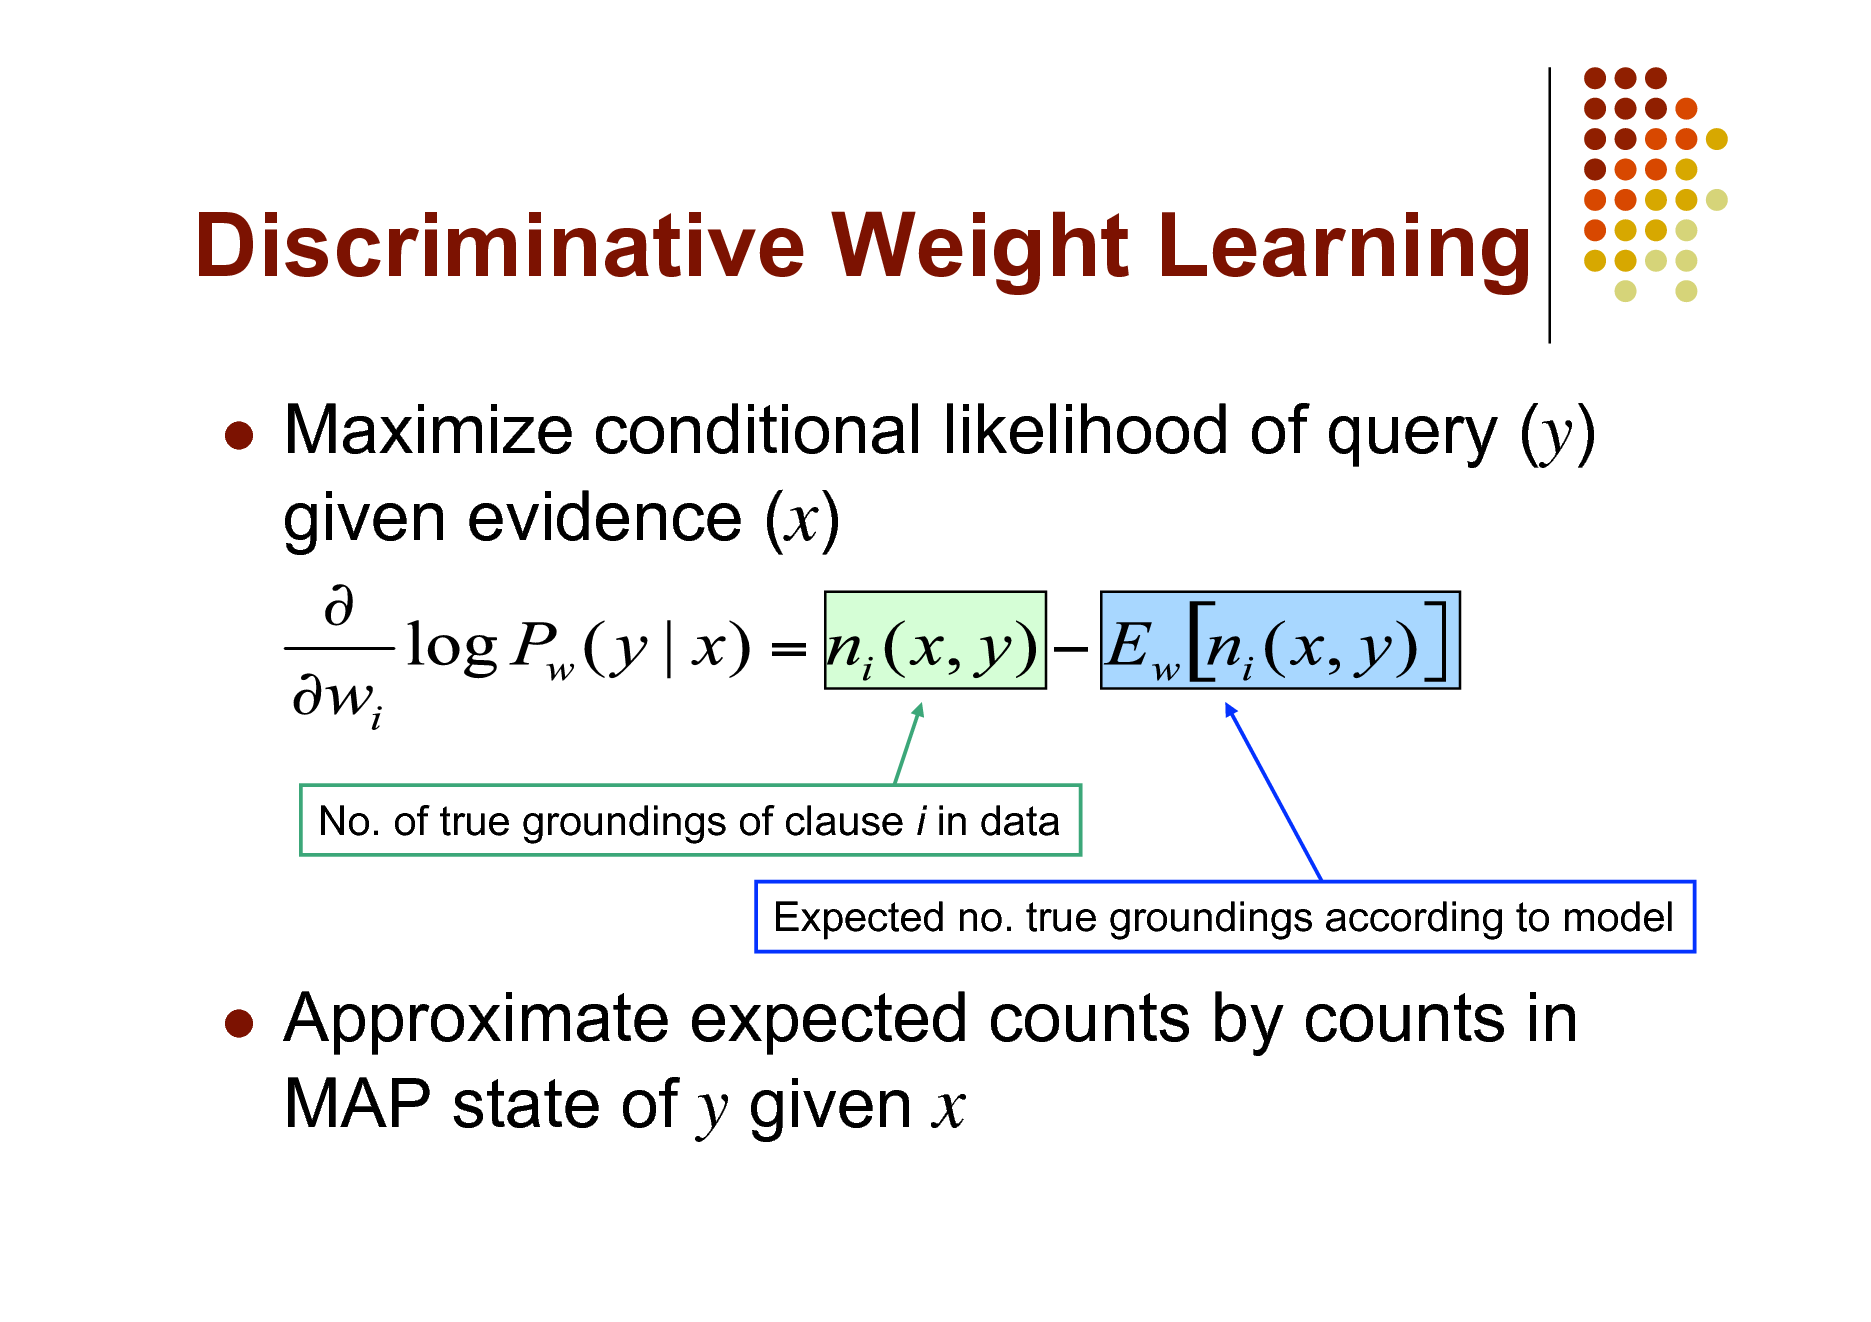 Slide: Discriminative Weight Learning


Maximize conditional likelihood of query (y) given evidence (x)

No. of true groundings of clause i in data Expected no. true groundings according to model



Approximate expected counts by counts in MAP state of y given x	


